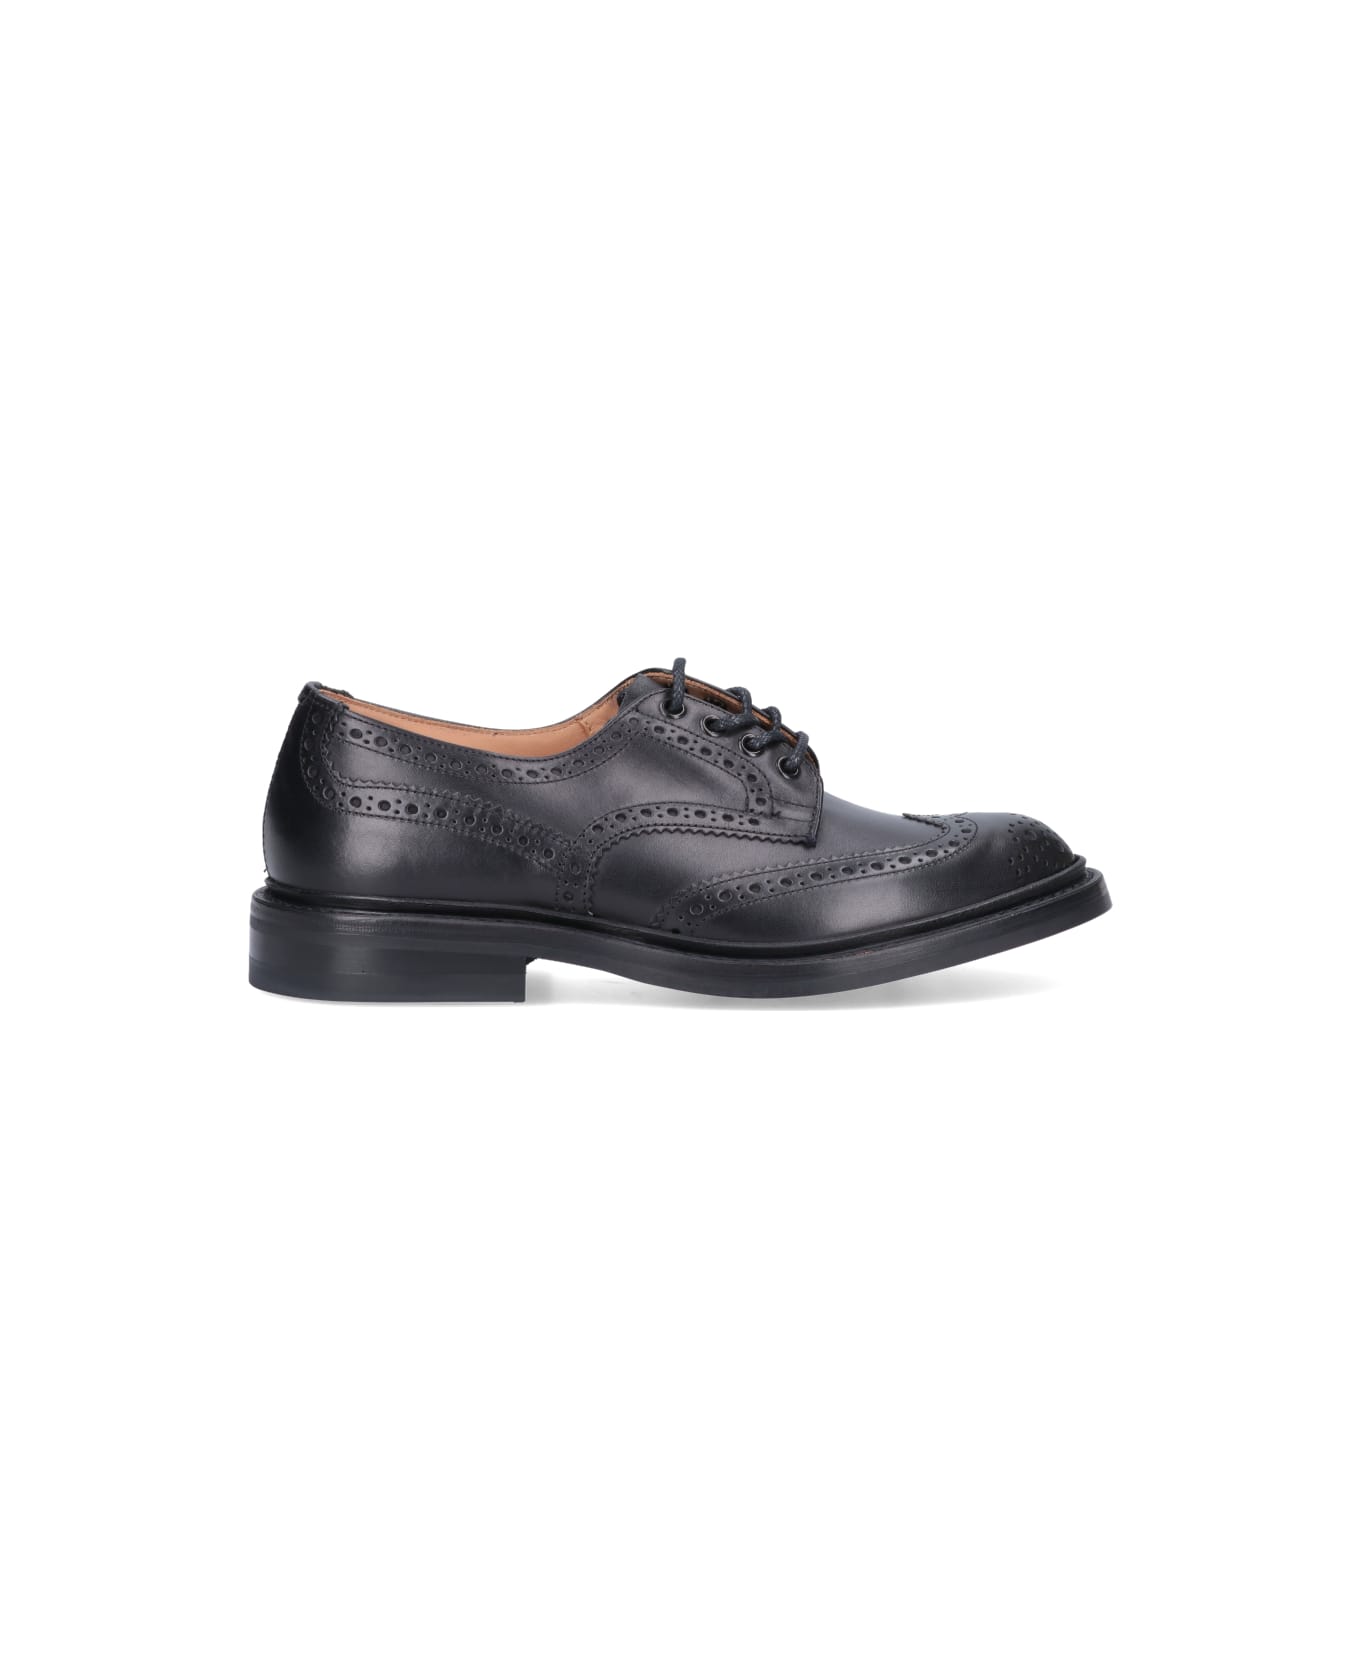 Tricker's Laced Shoes - Black